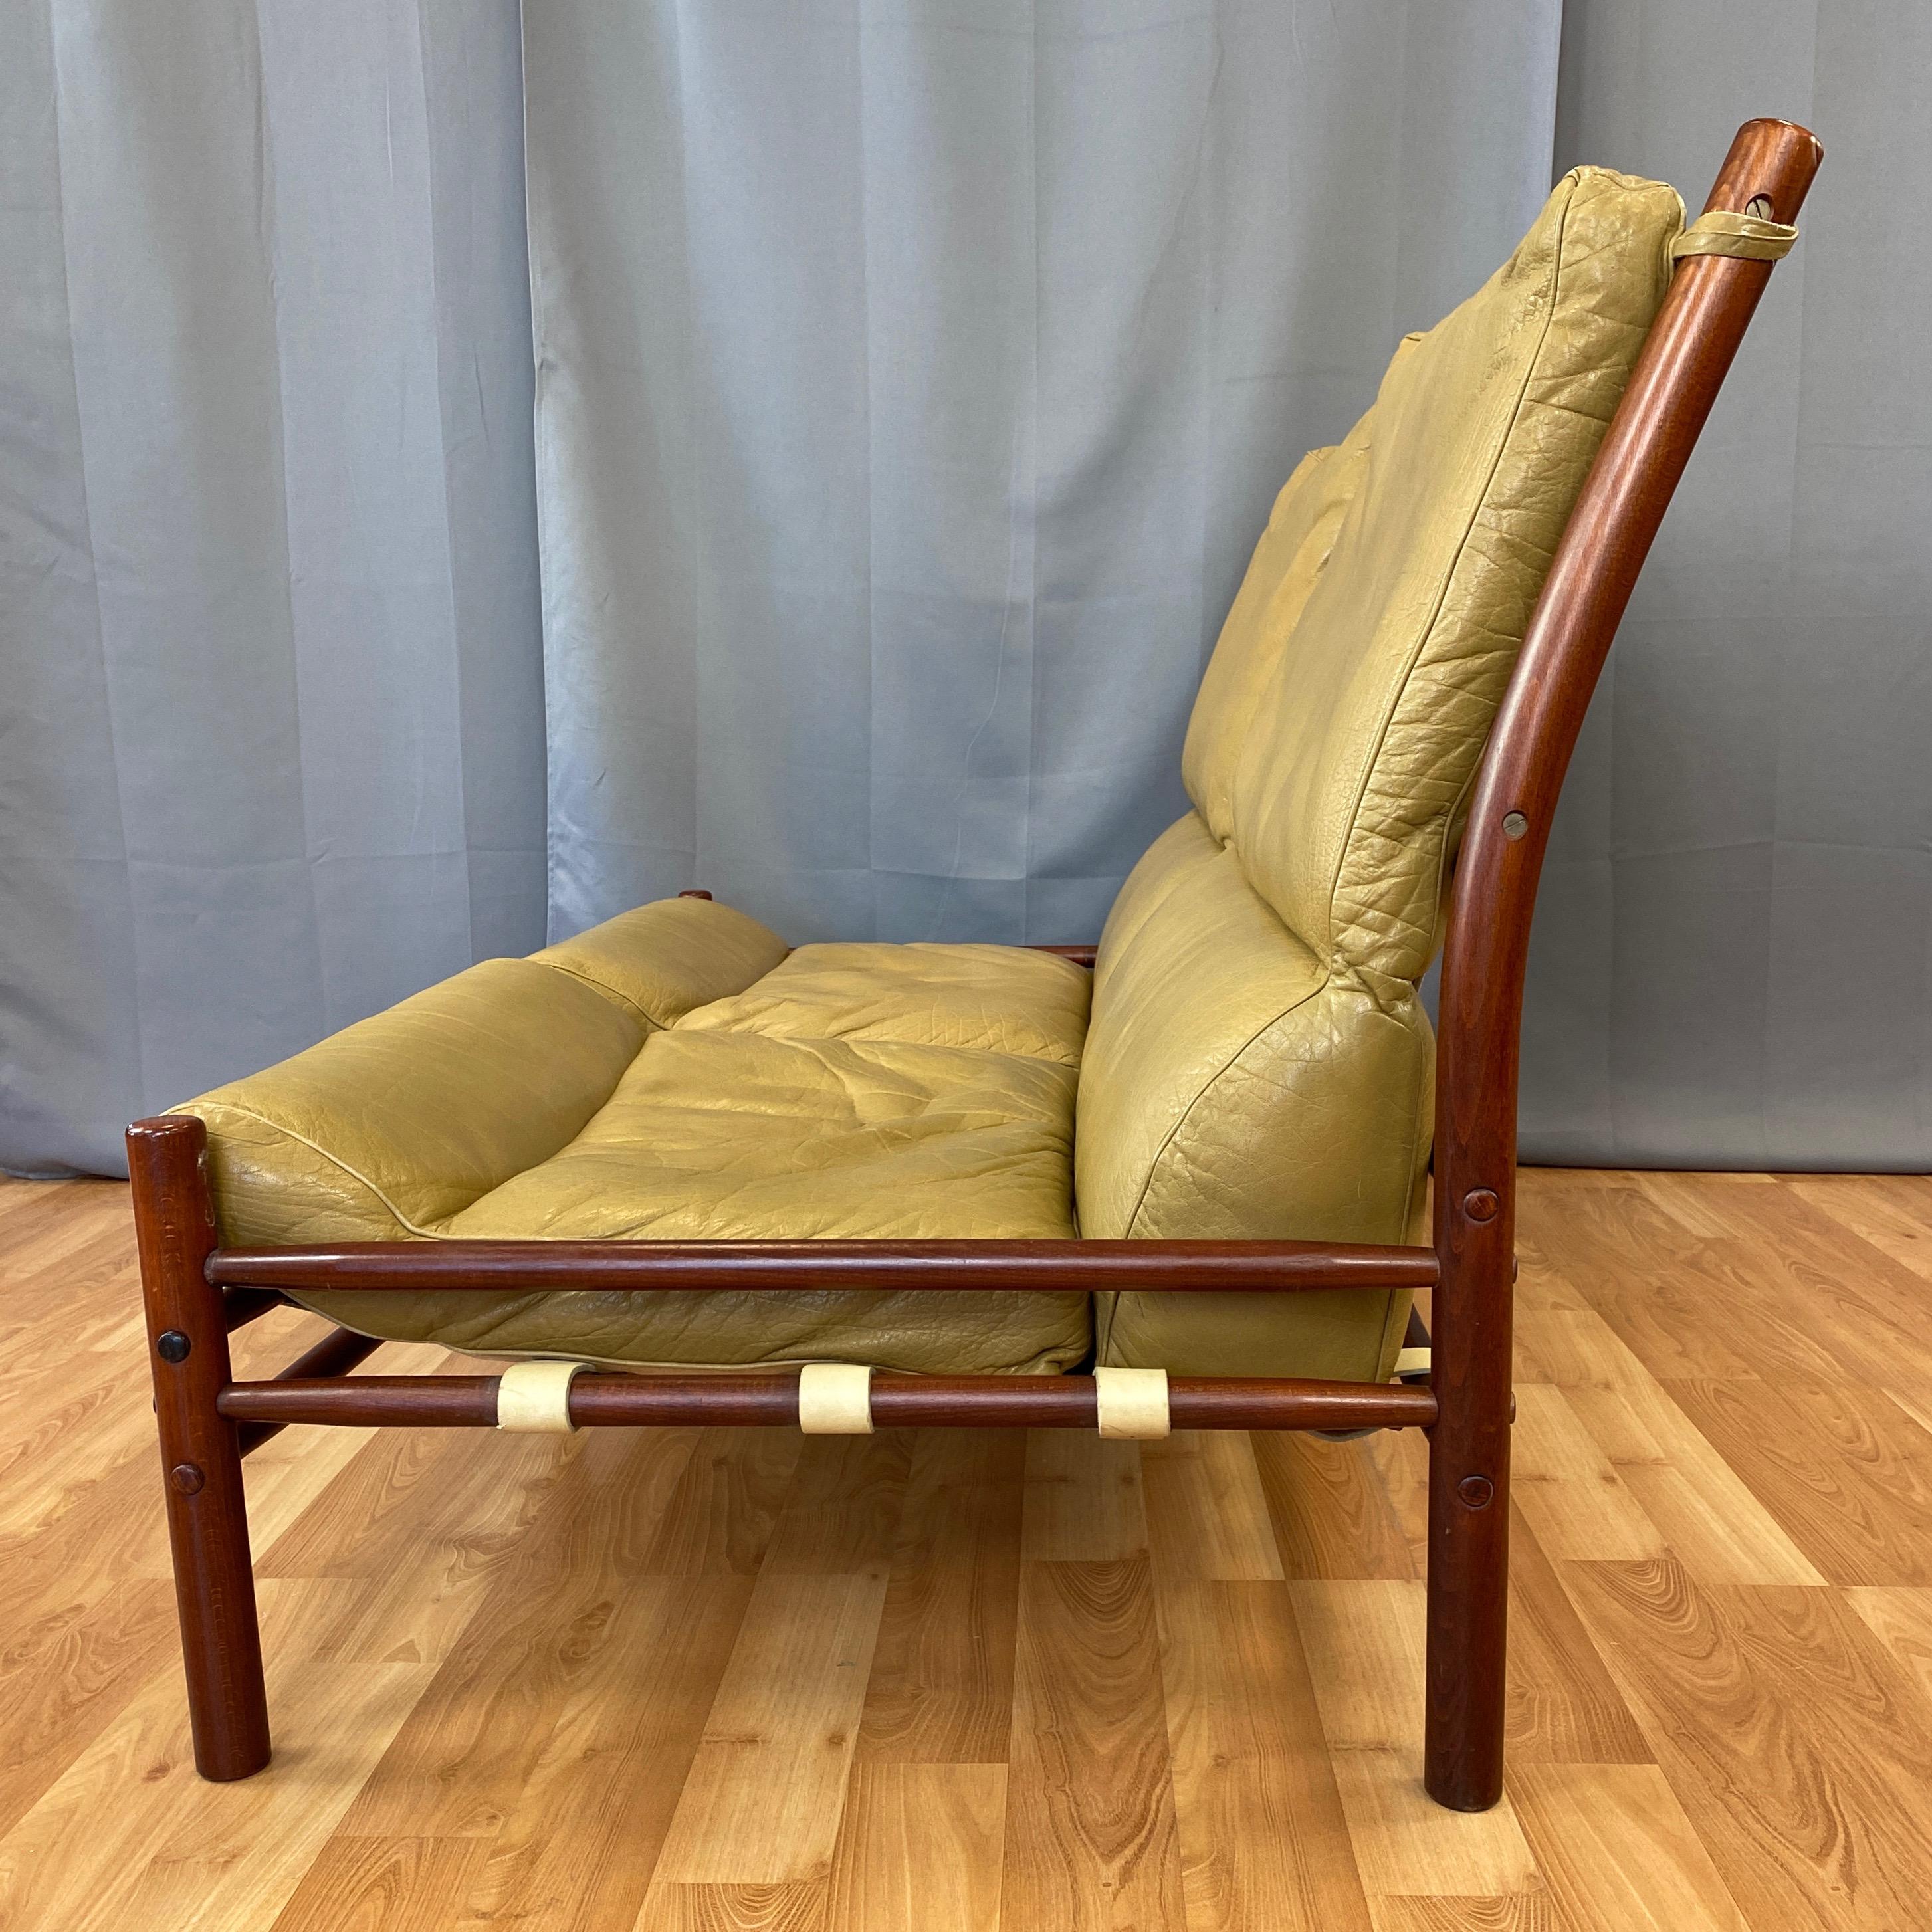 Brass Arne Norell Inca Armless Settee in Teak-Colored Beech and Tan Leather, 1970s